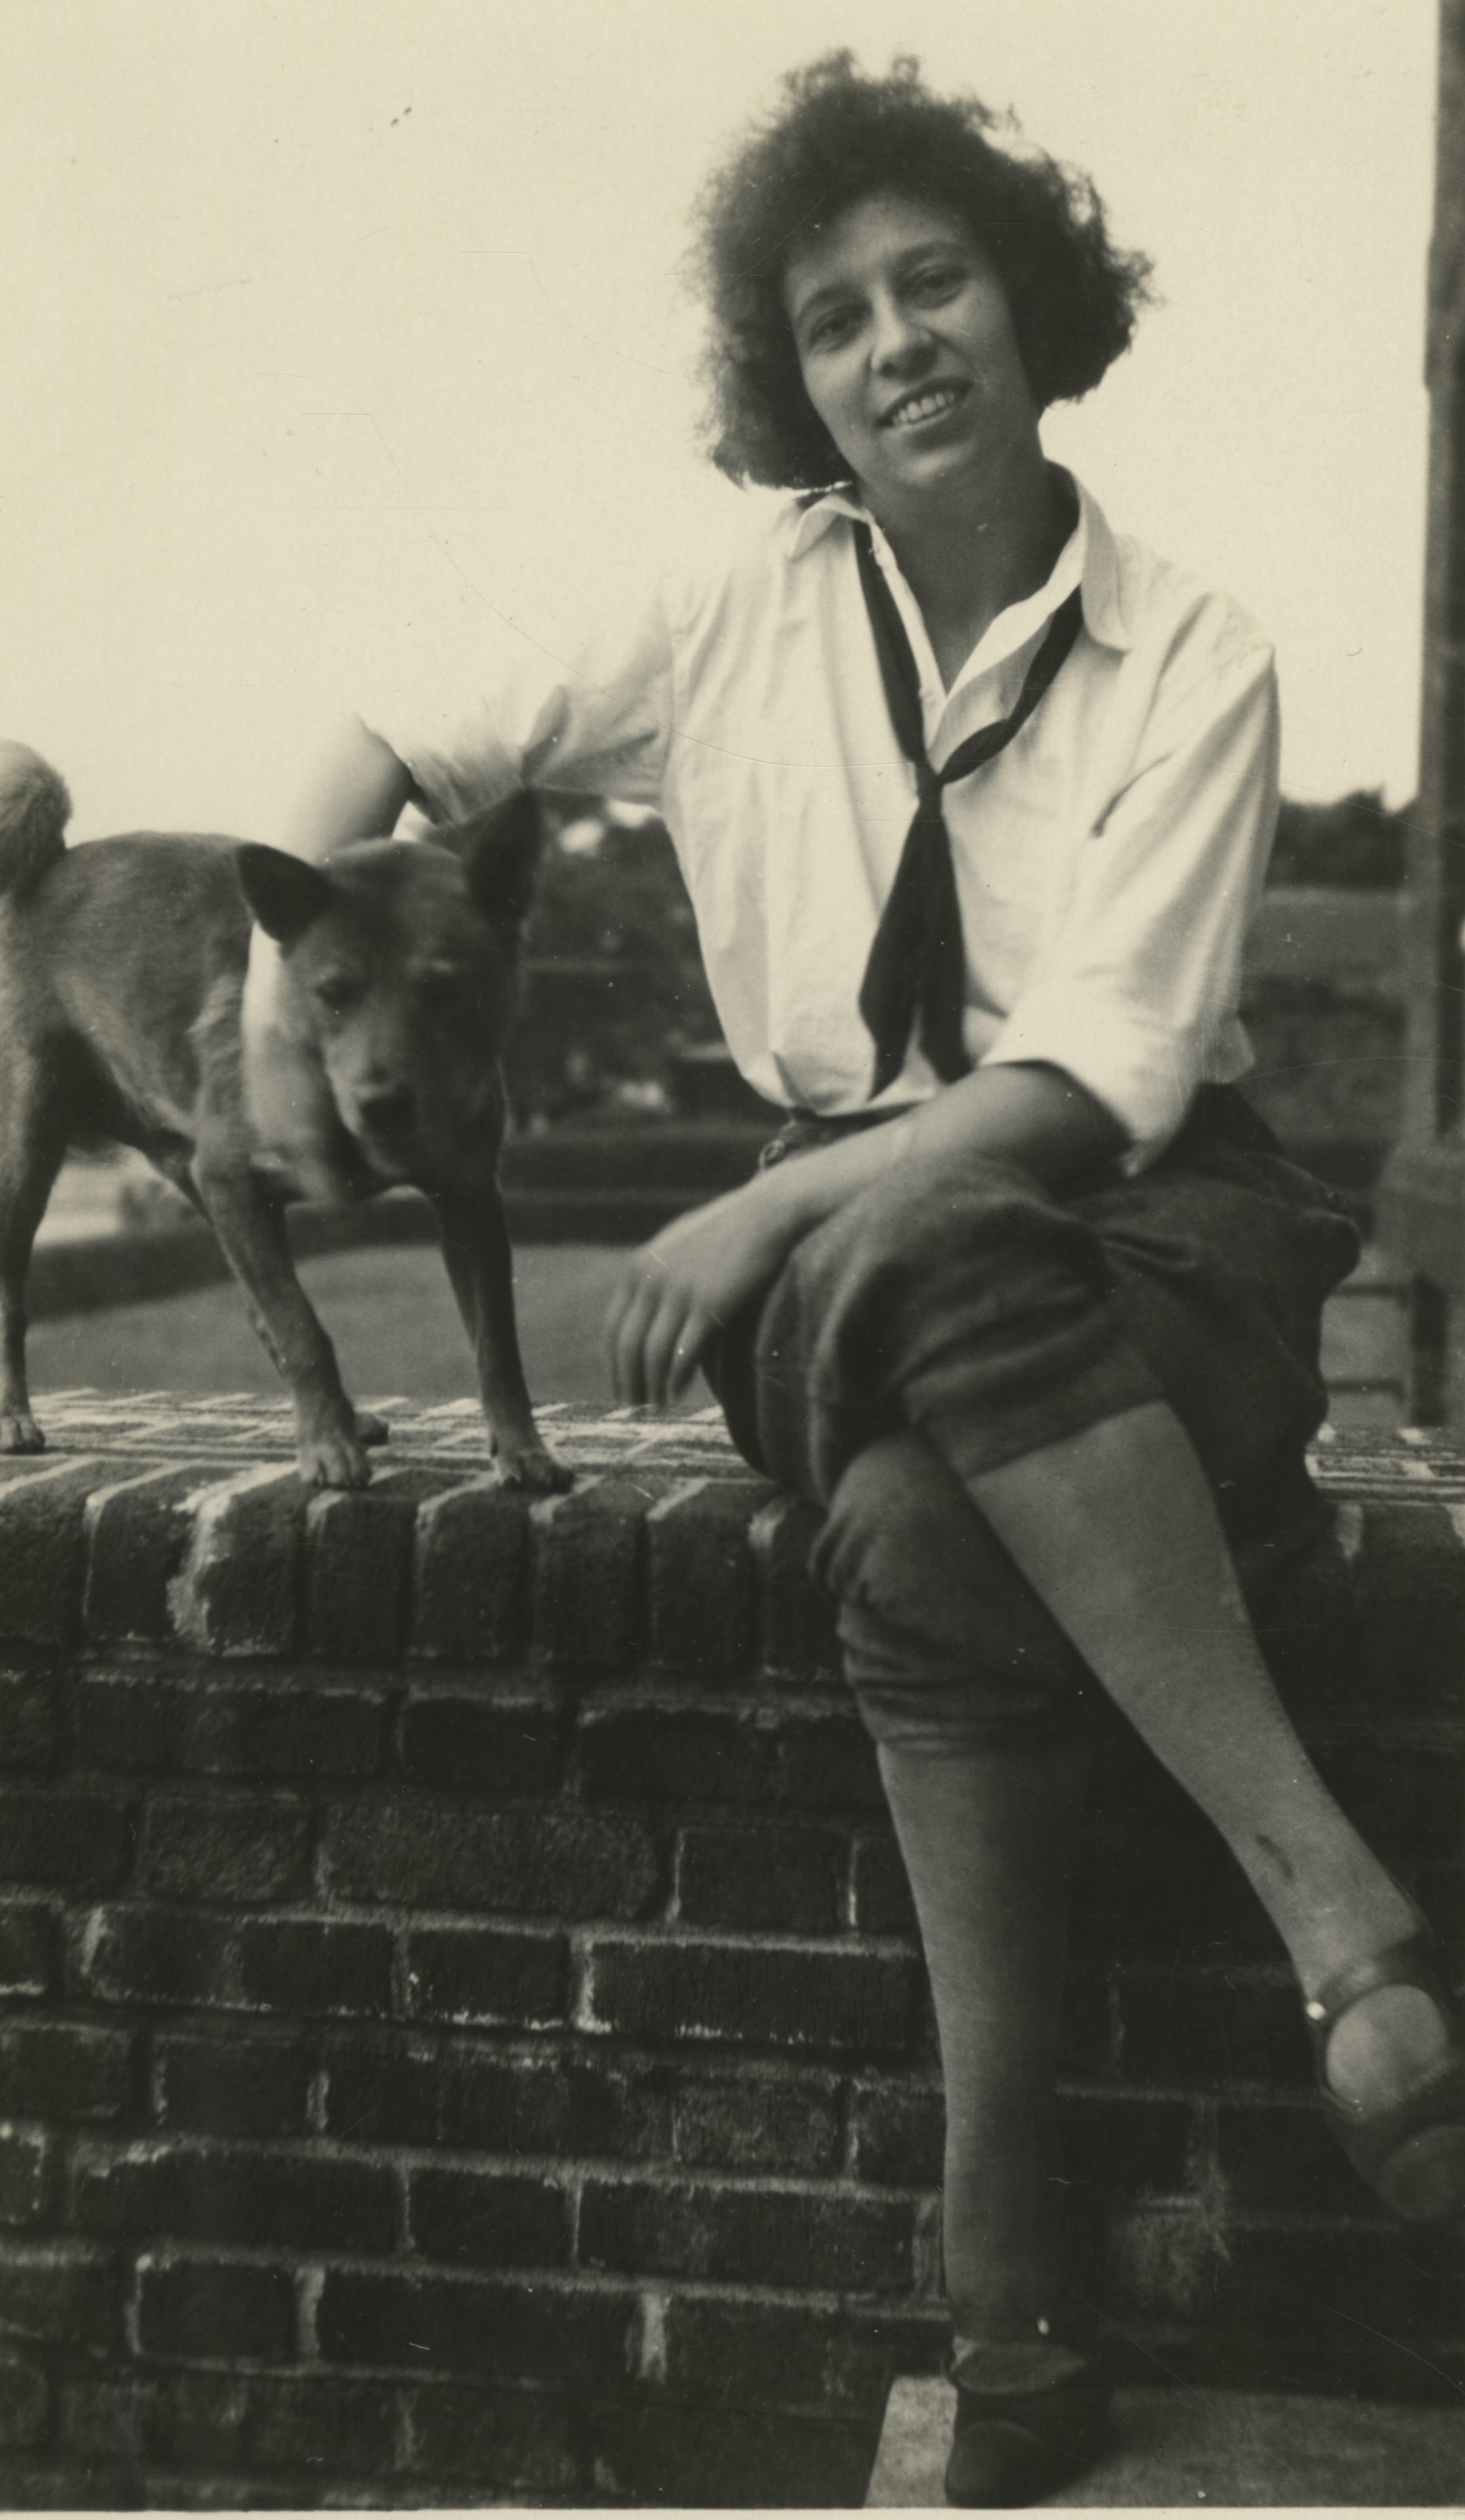 Black and white image of woman seated with a dog.